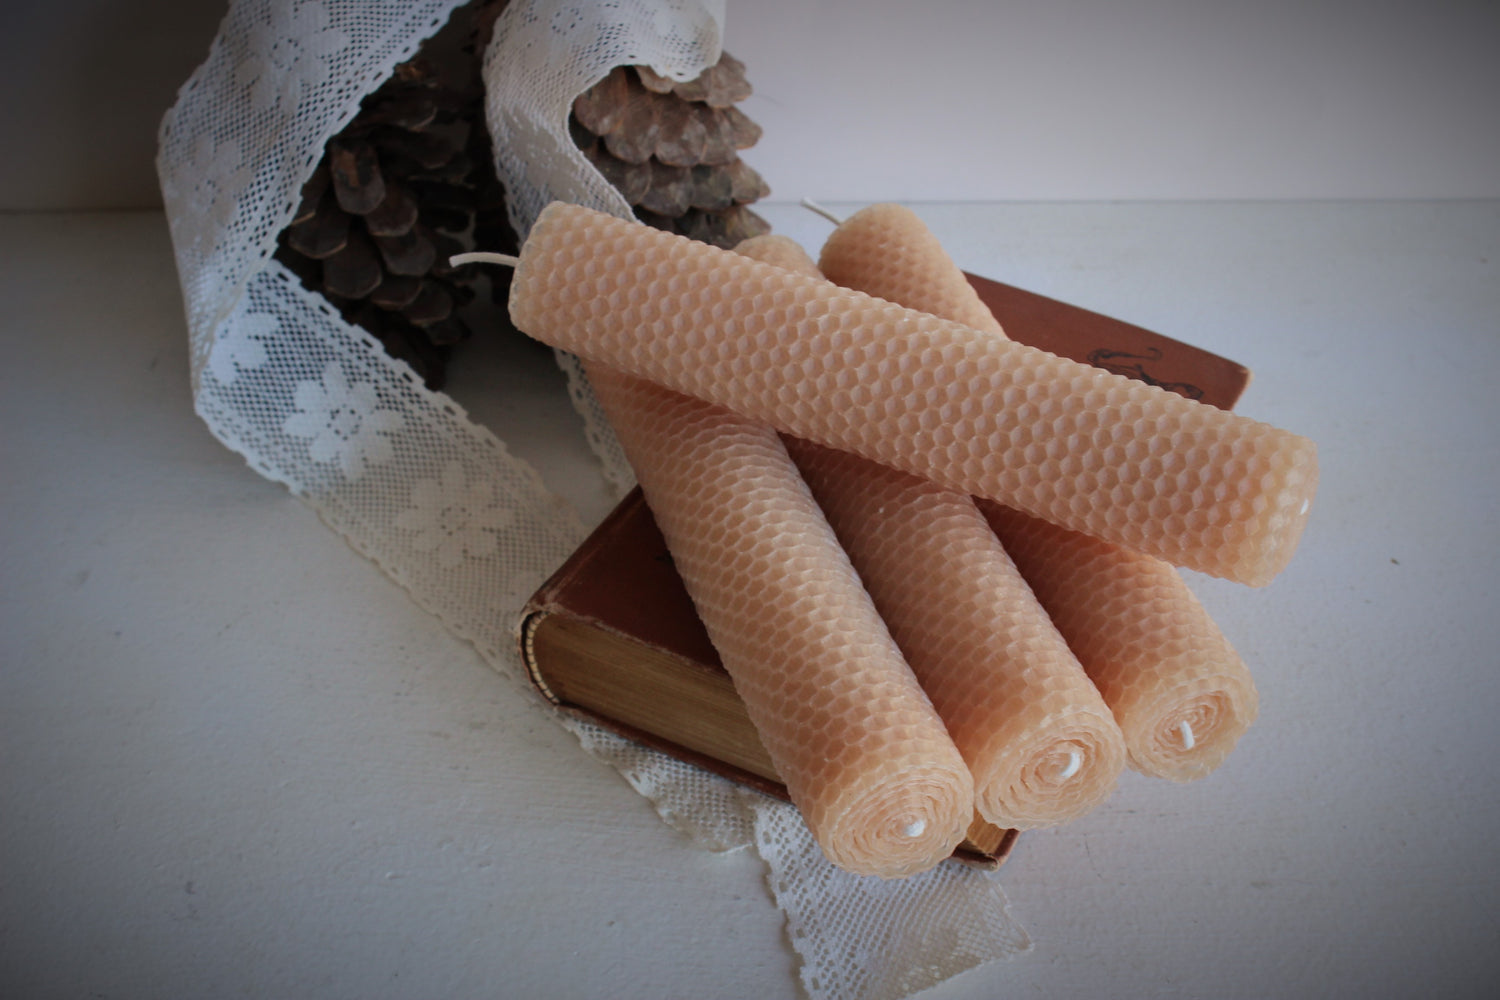 "The Bees Knees" Handmade Beeswax Candle